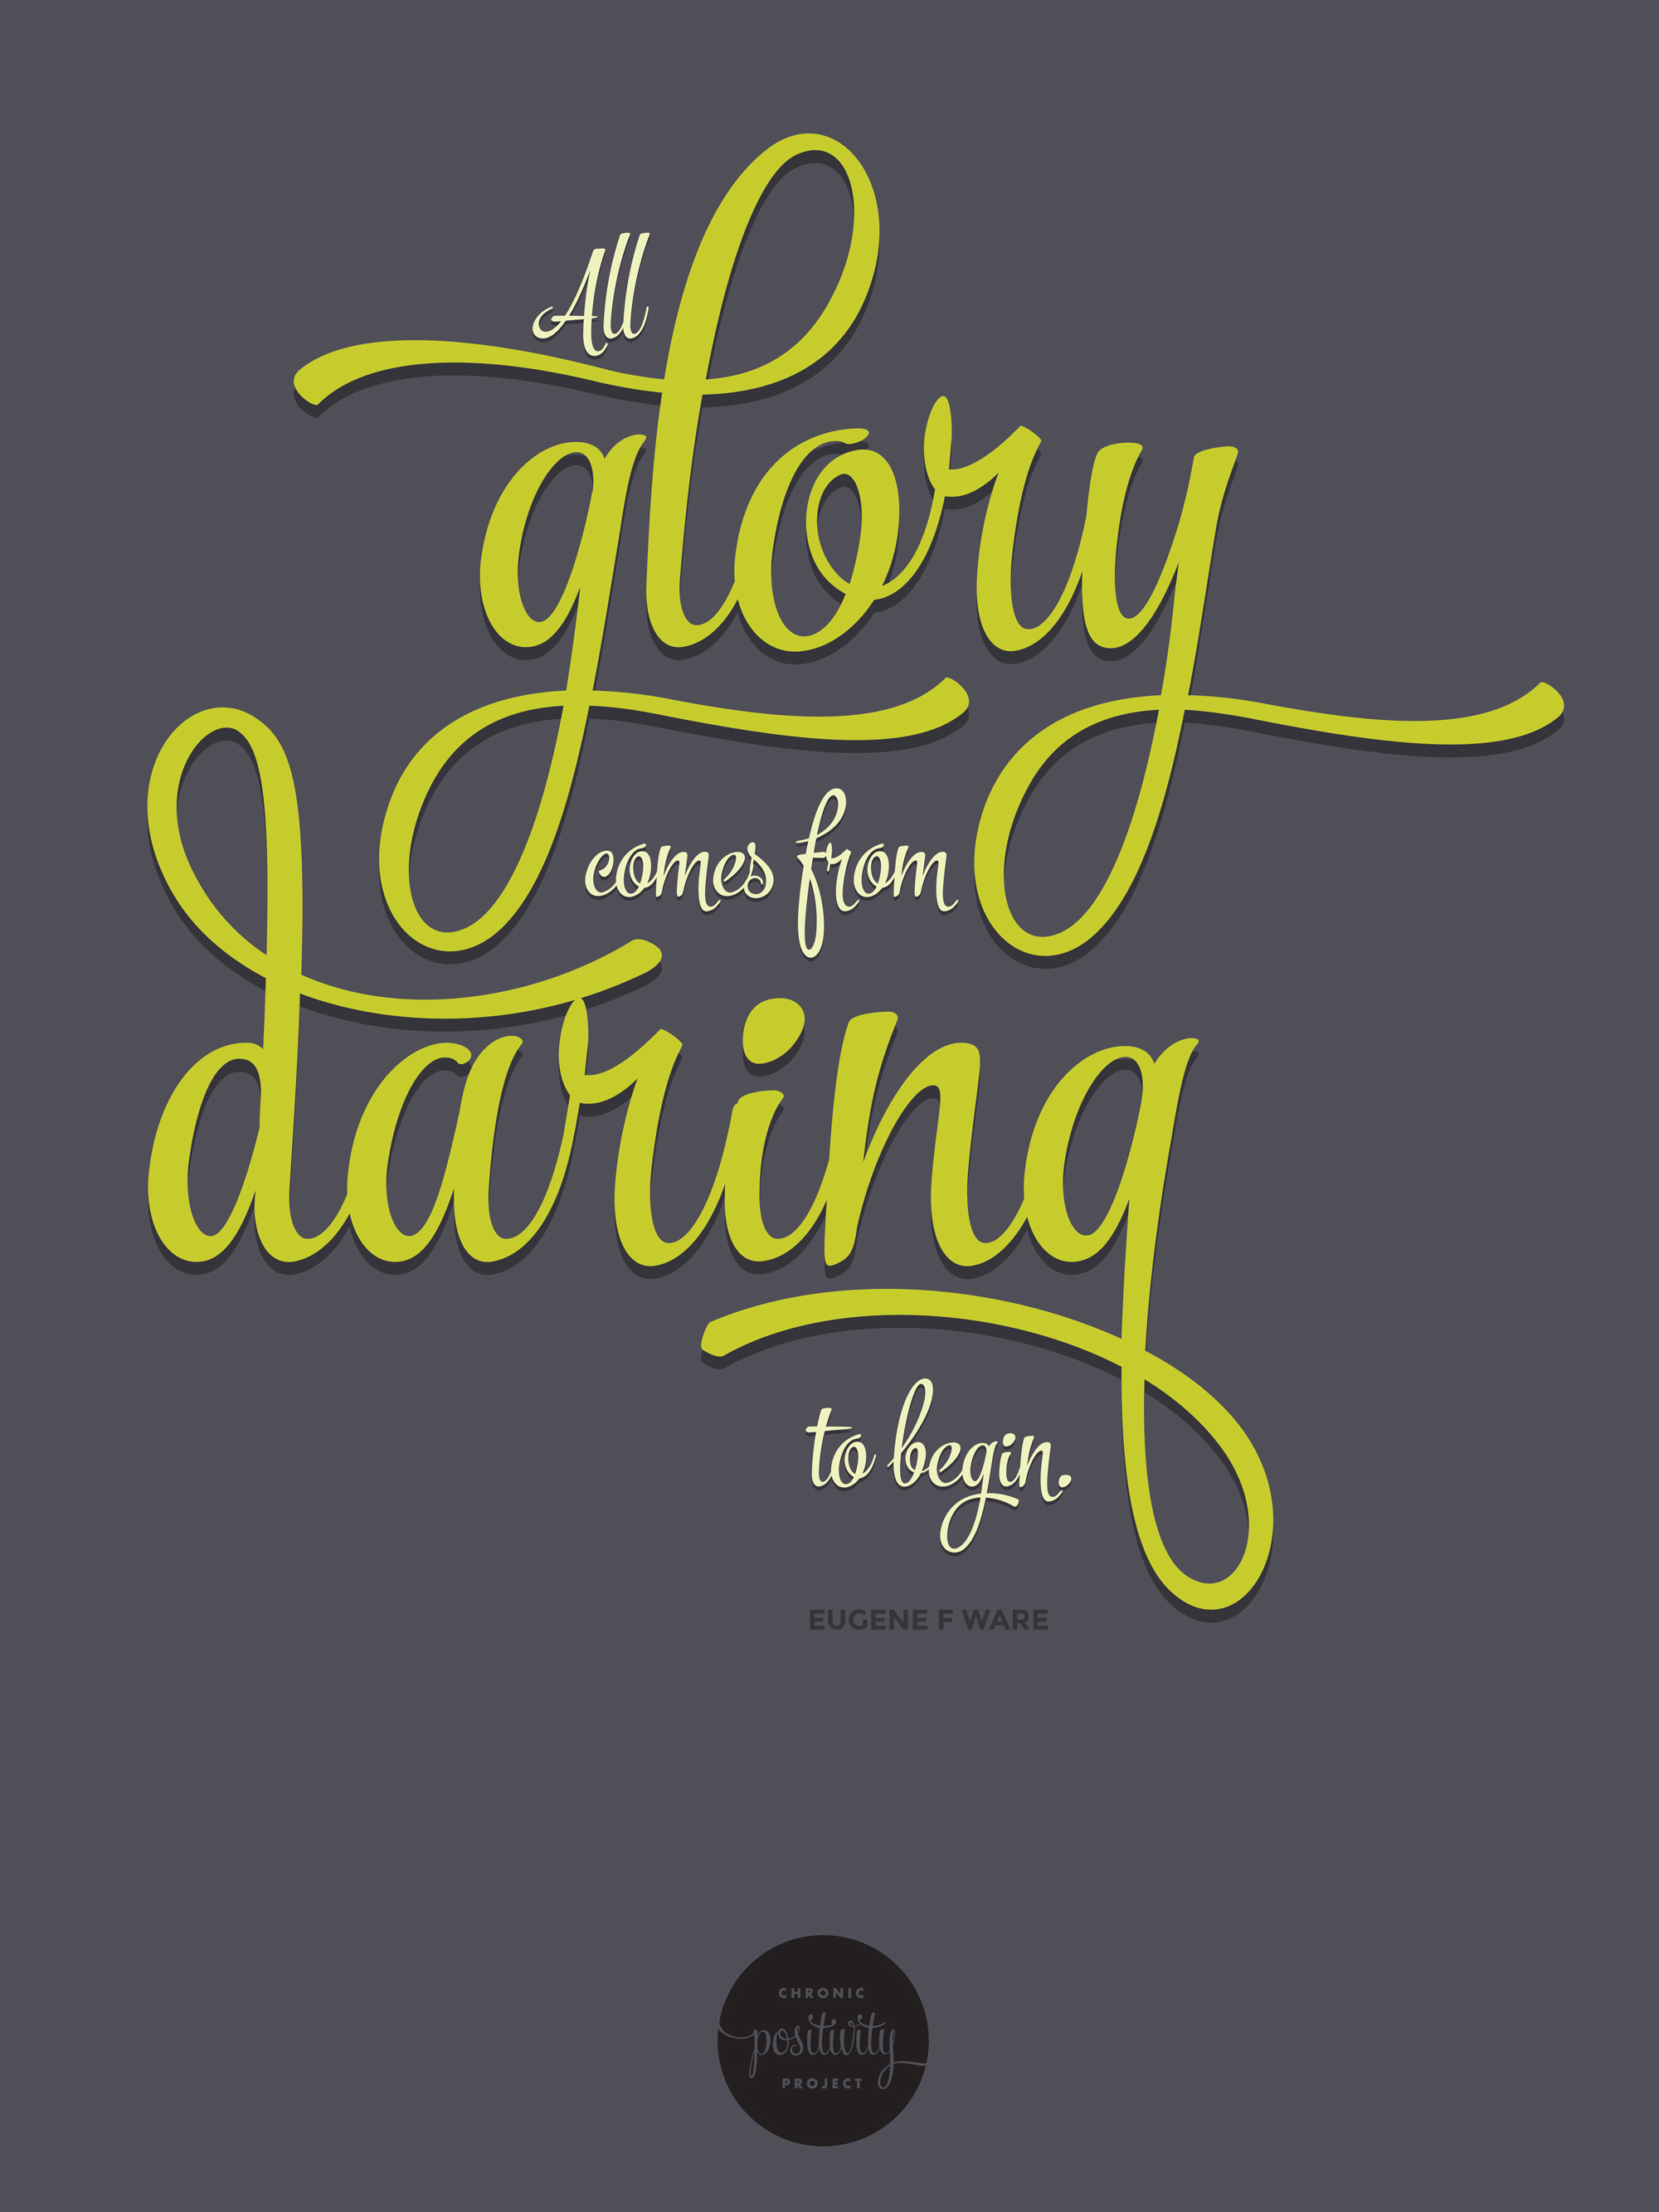 #42: All glory comes from daring to begin. Eugene F Ware